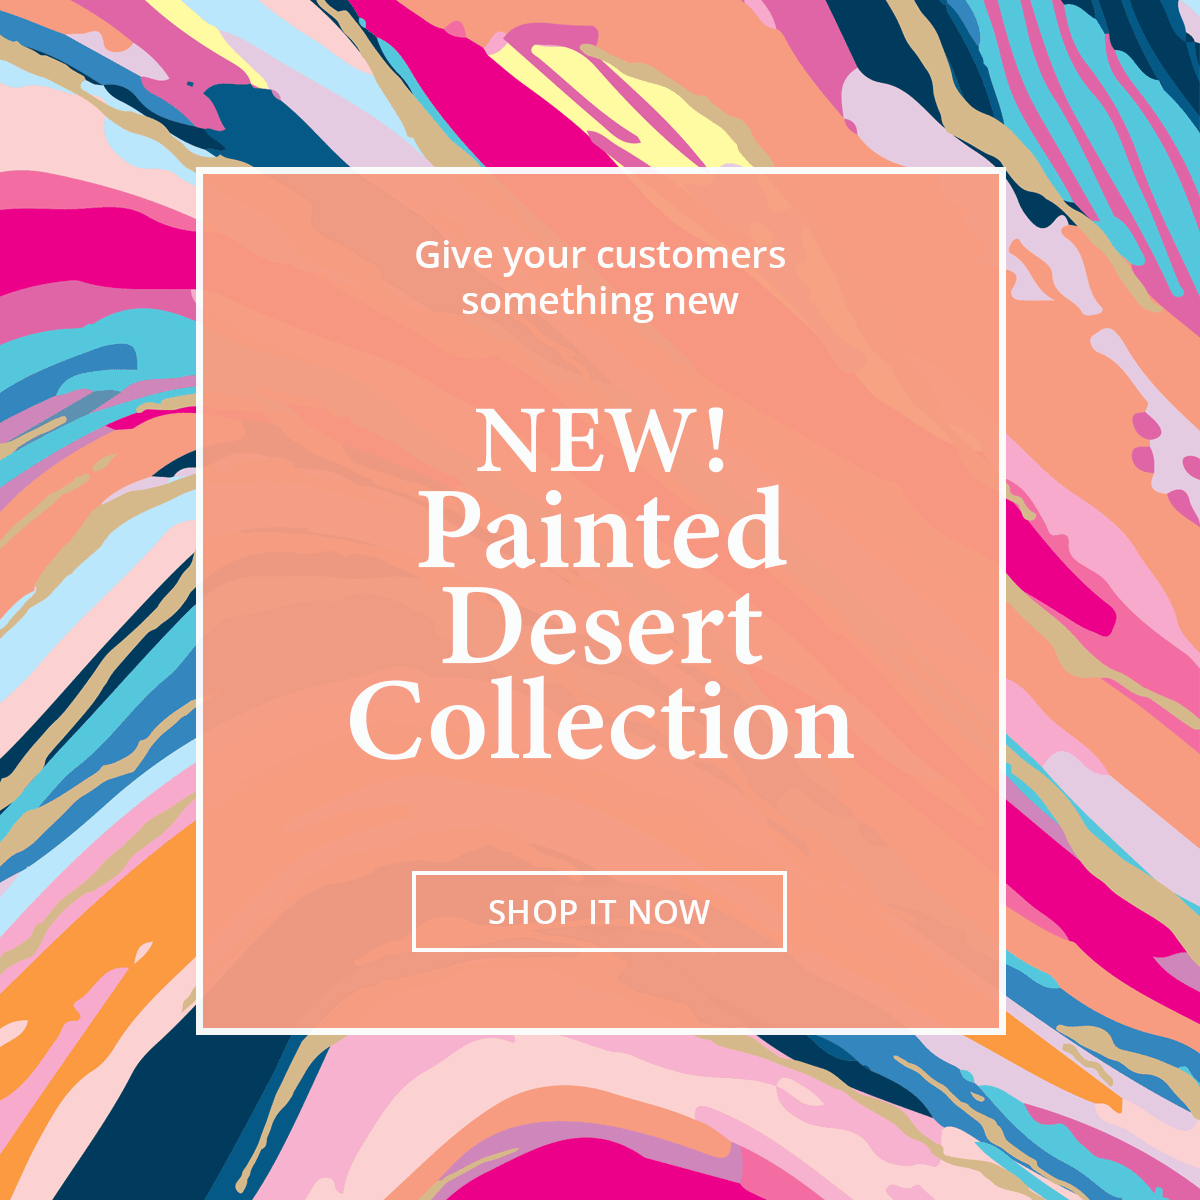 See the new Painted Desert Collection